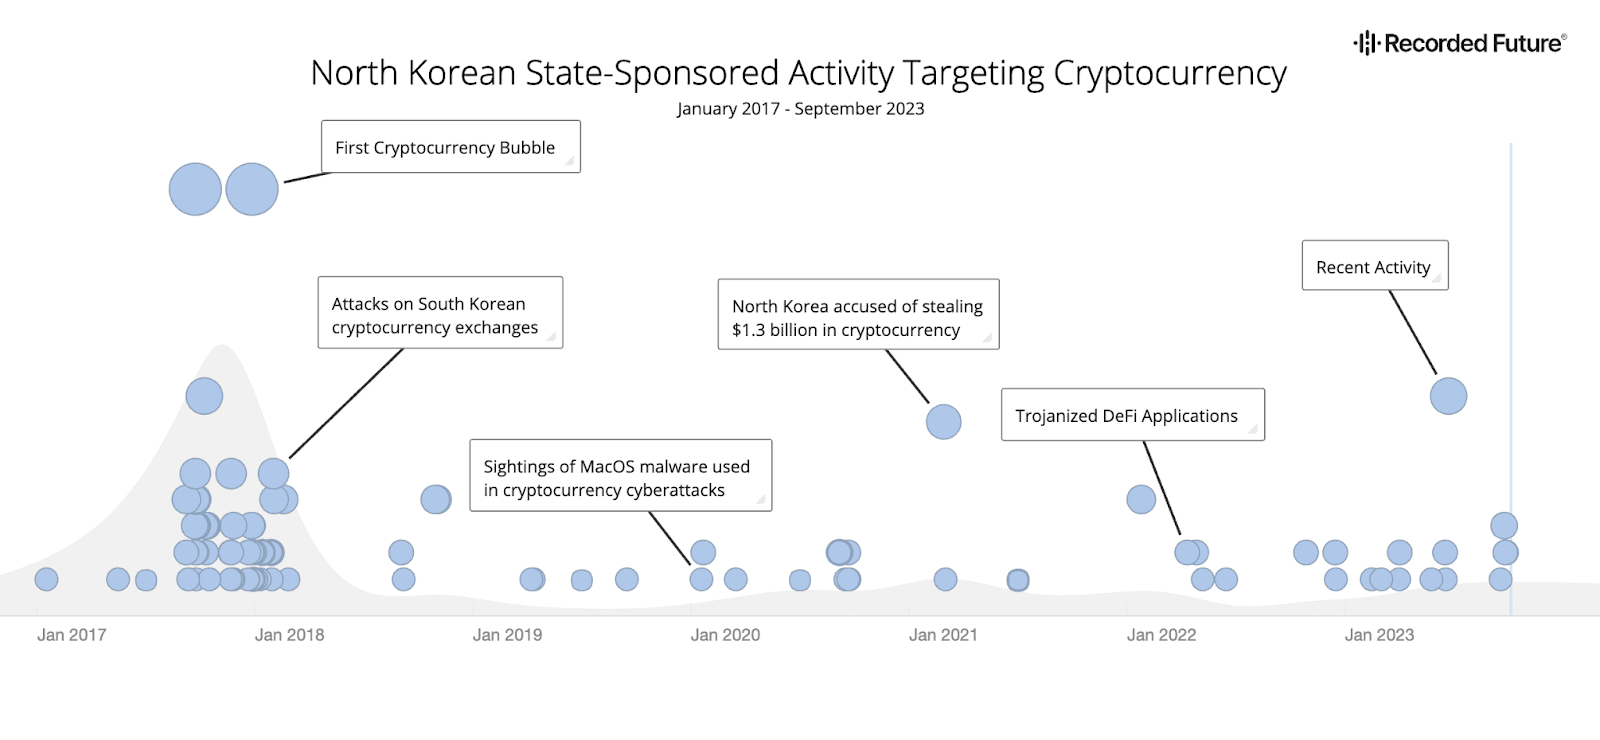 North Korean State-Sponsored Activity Targeting Cryptocurrency